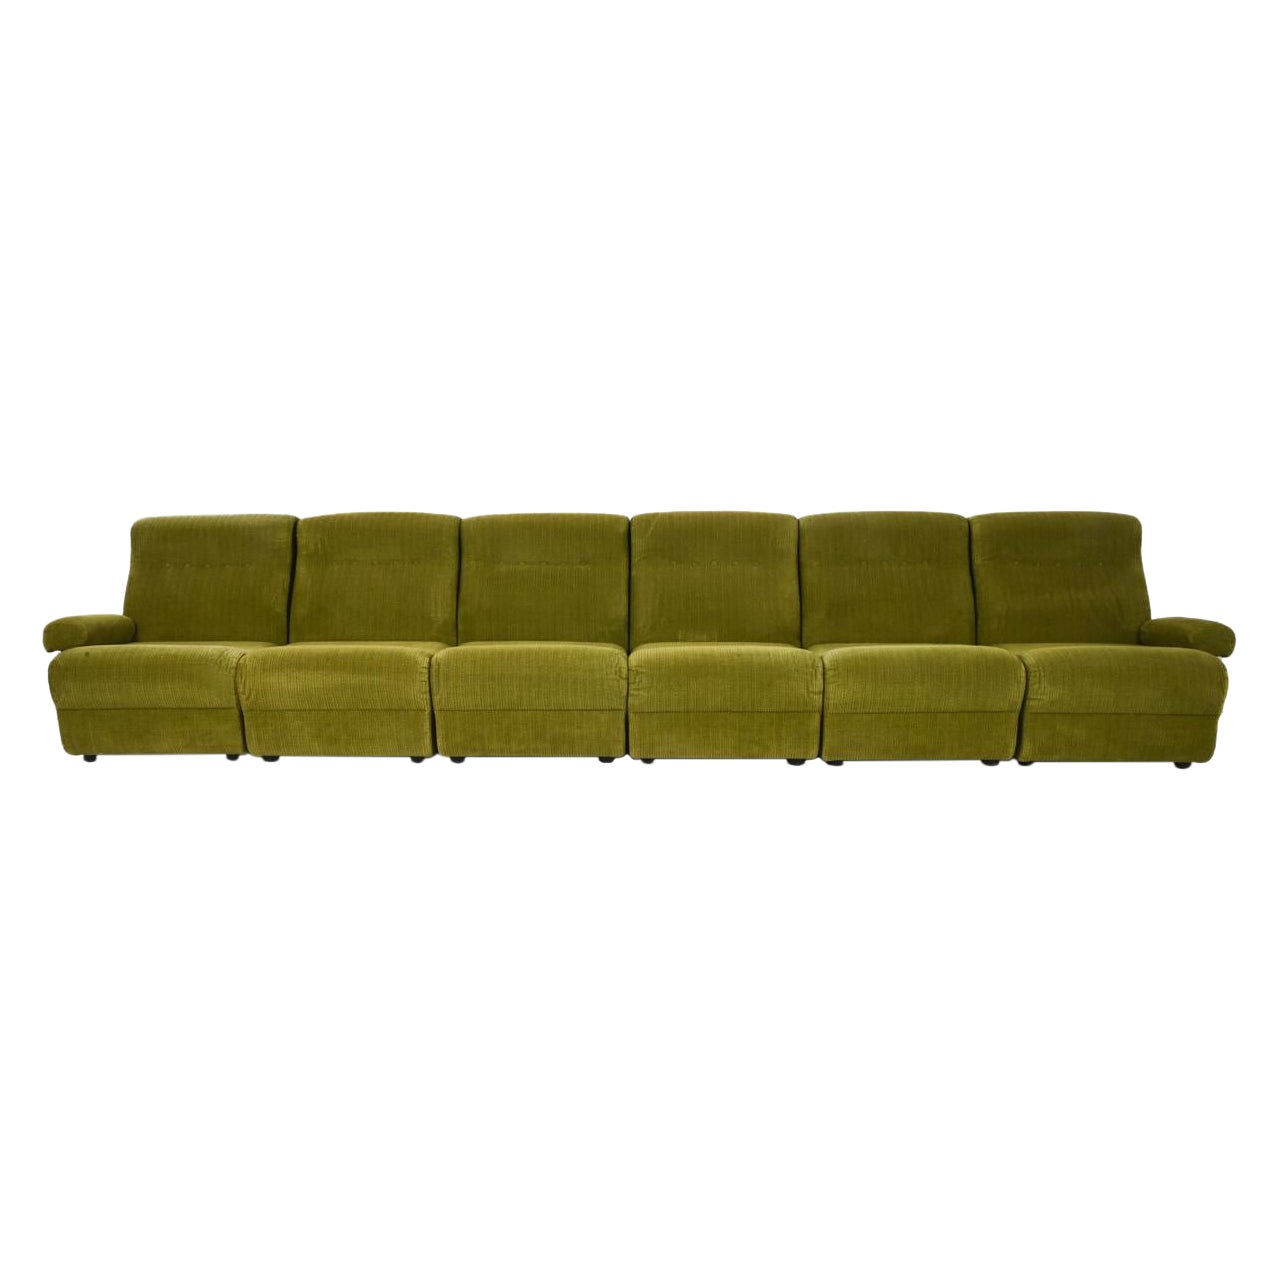 1970's Space Age Modular Sectional Sofa in Corded Sheared Boucle